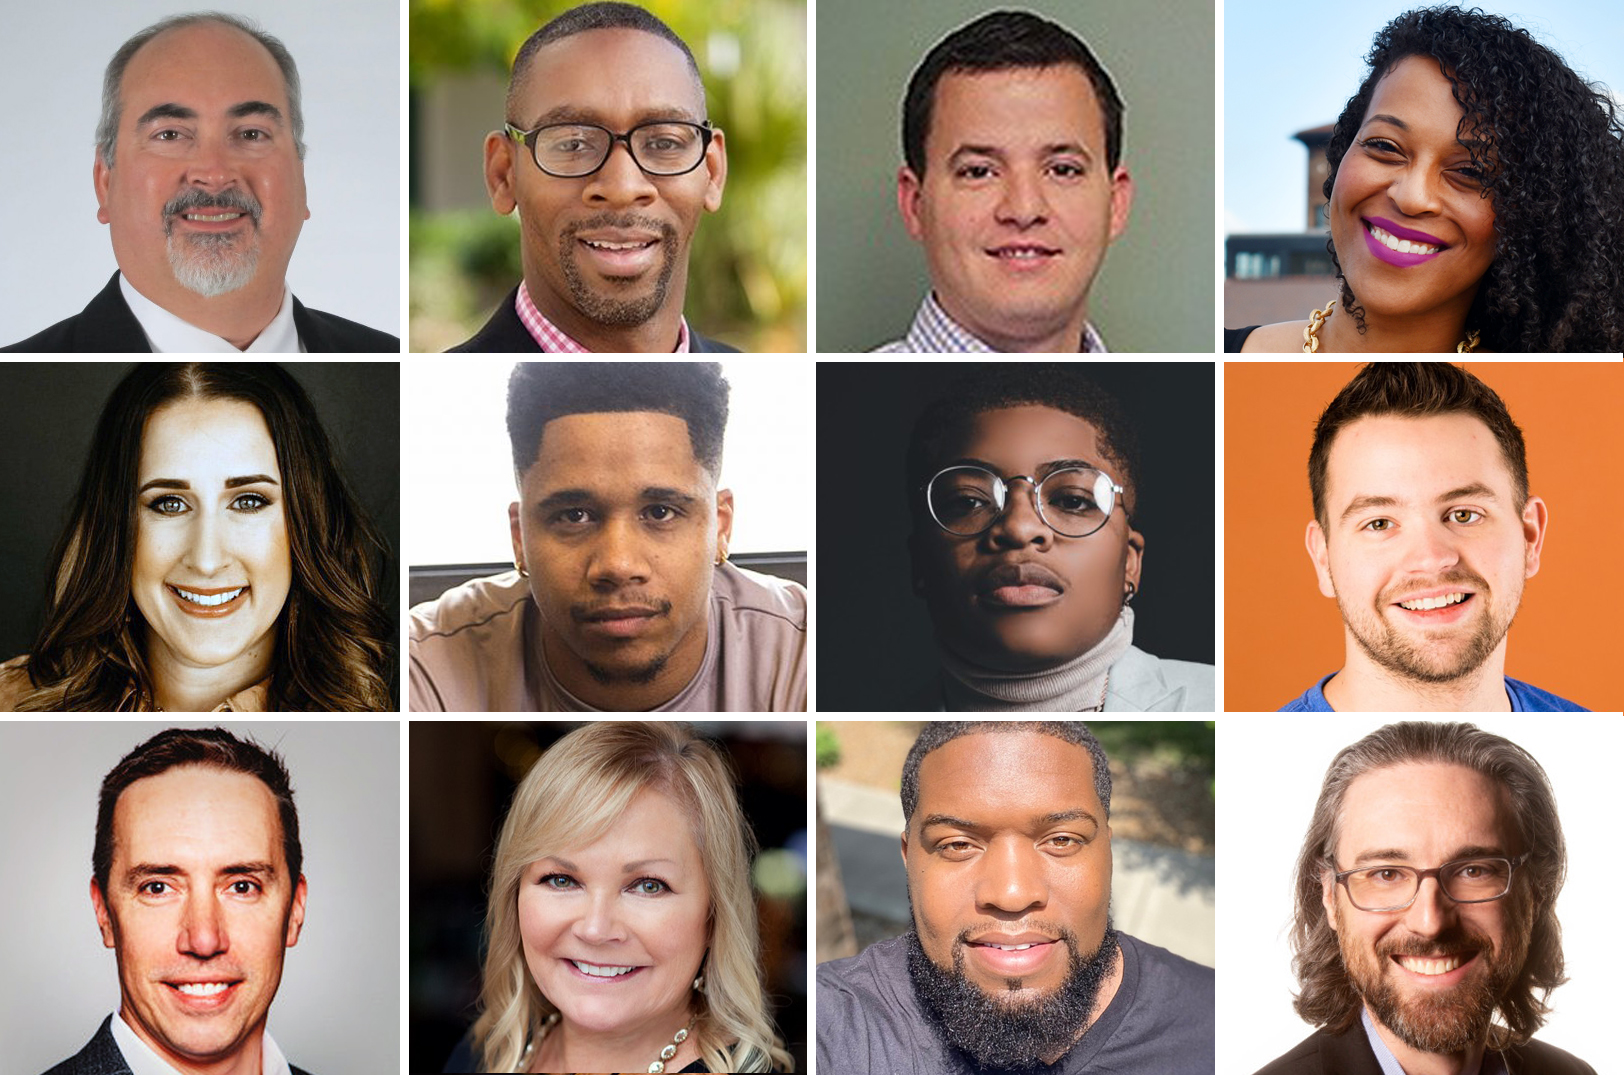 Meet the new 2022 Pipeline fellows building ‘breakout’ startups and poised for rapid scale